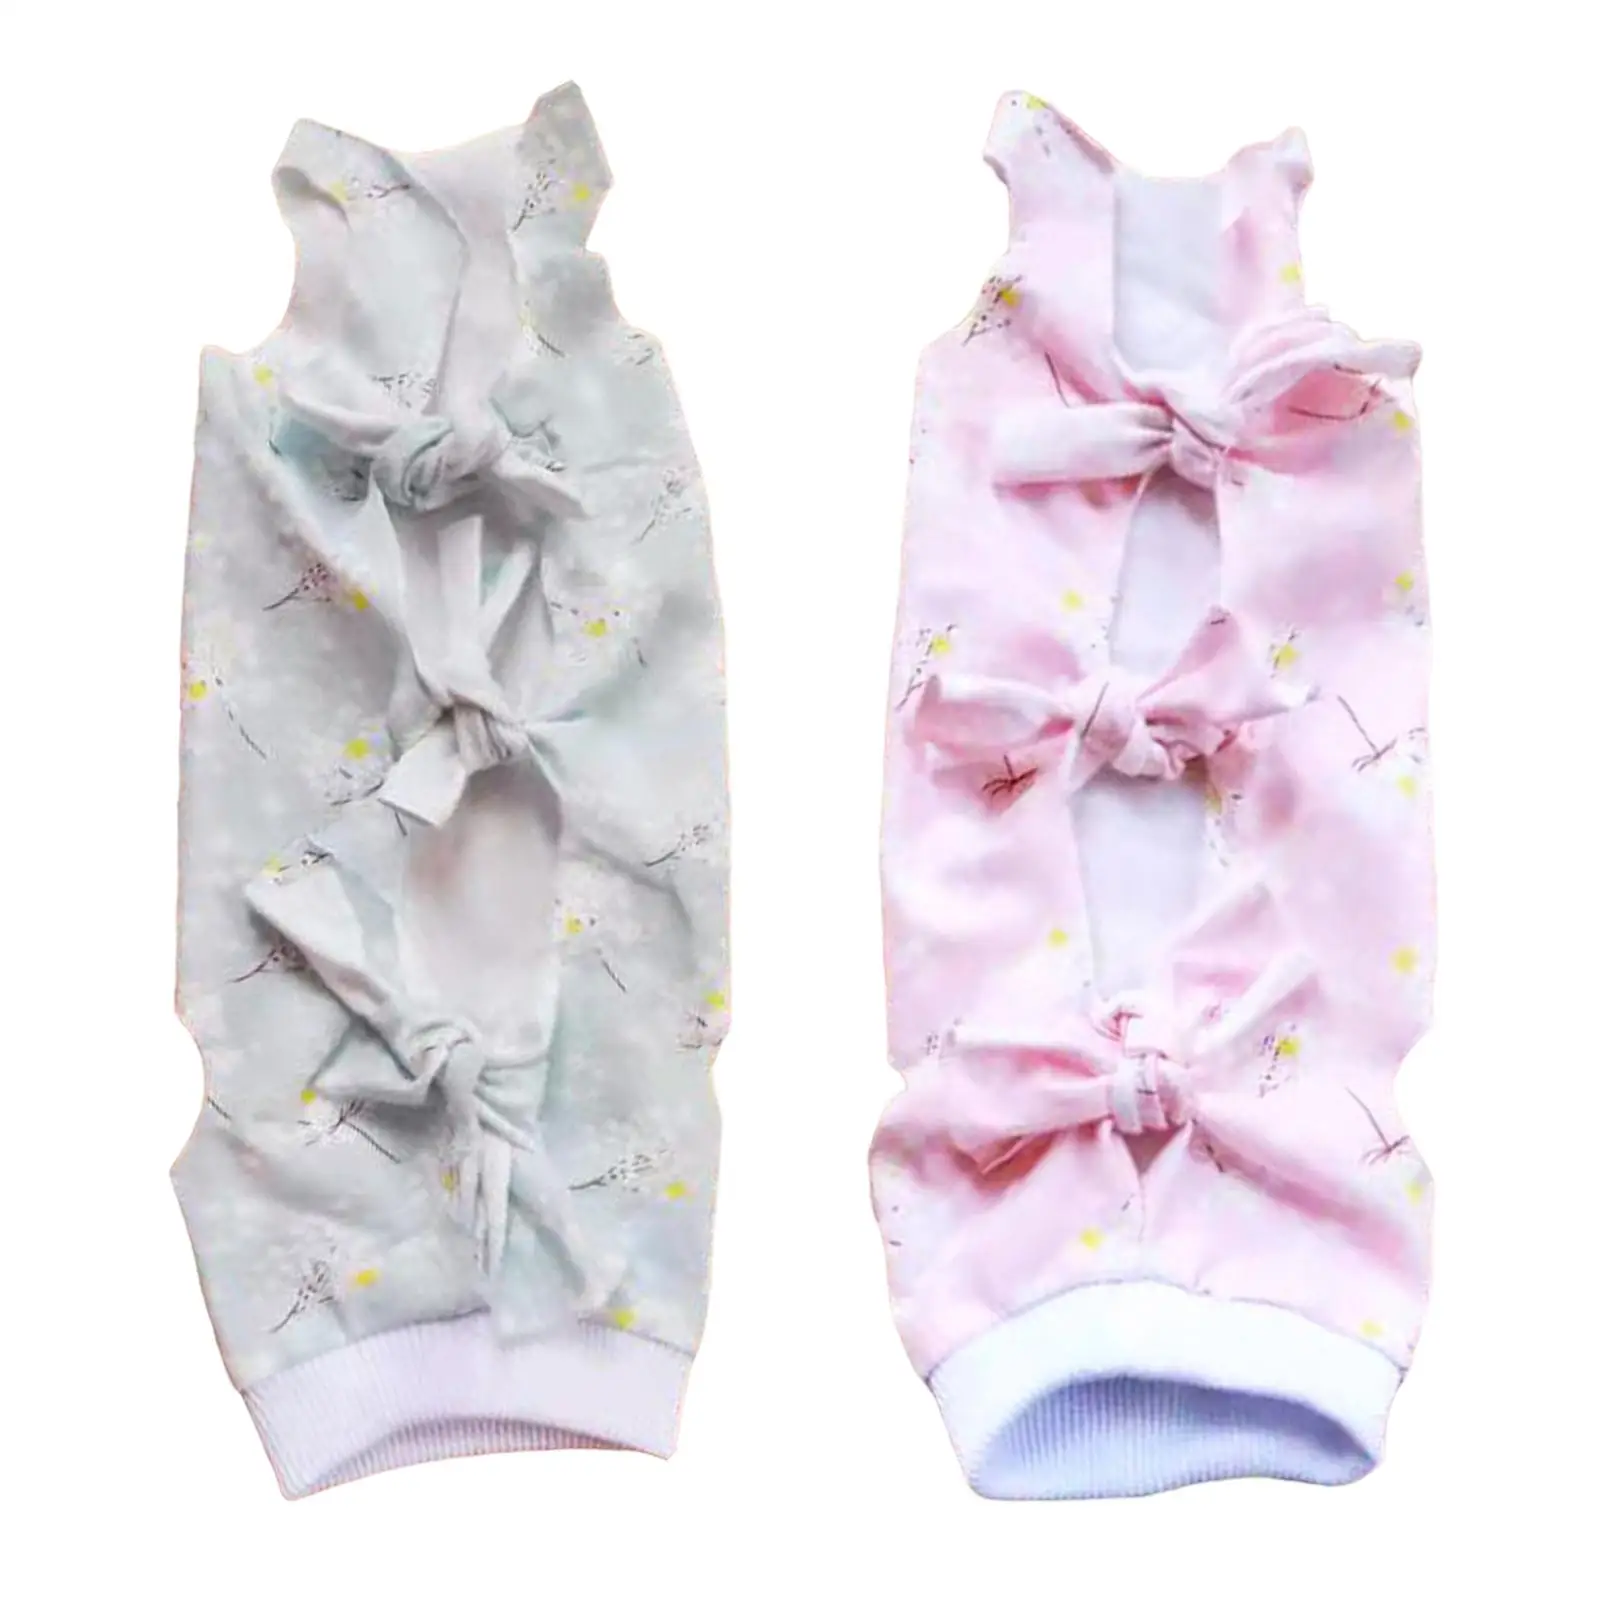 Cat Recovery Suit Clothes Anti Leak Protection wearing Pants Vest Pajama Breathable for Puppy Indoor Home Cats Kittens